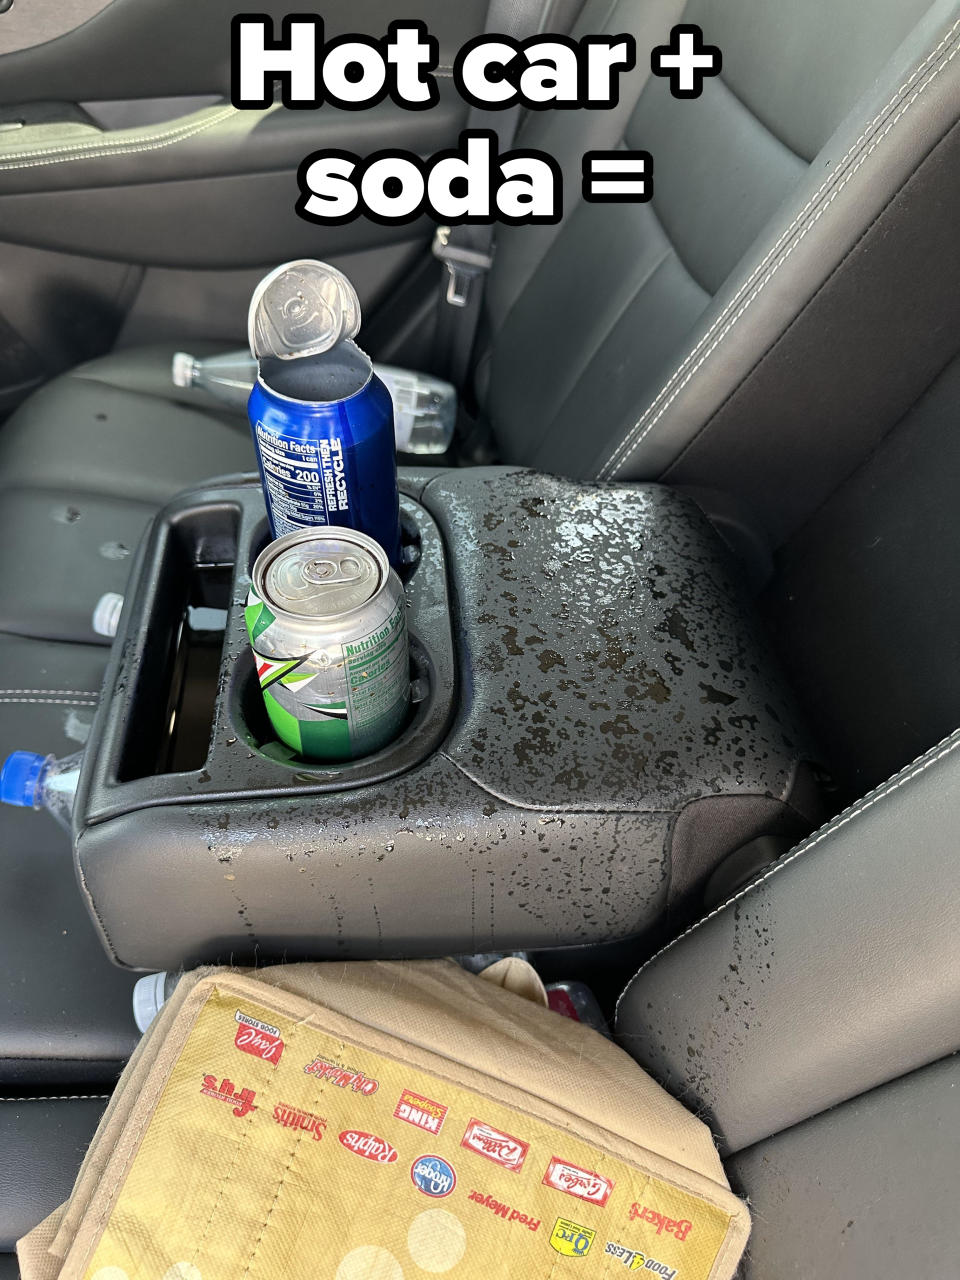 Two soda cans, one on its side and spilled onto the car's center console, with water bottles and a tote bag nearby on the backseat